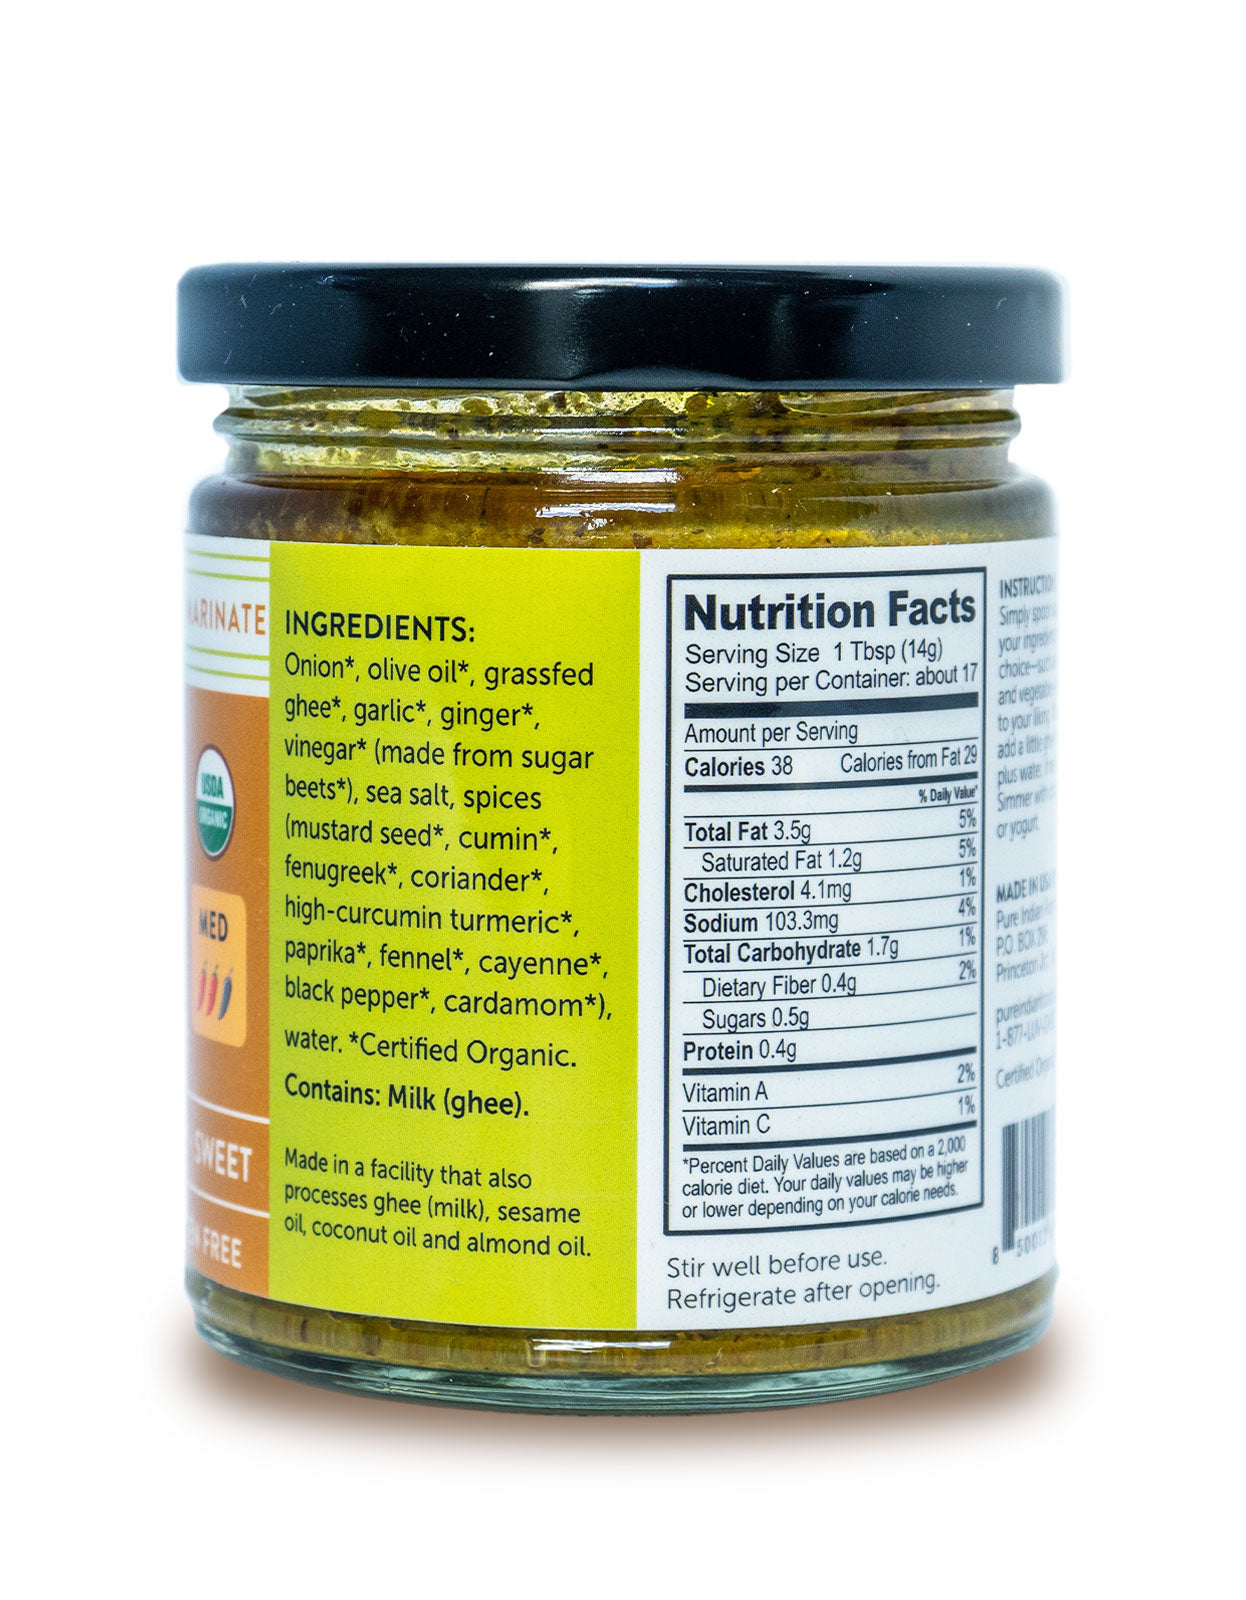 Ingredients label and Nutrition Facts label on a jar of Pure Indian Foods Keto in A Hurry